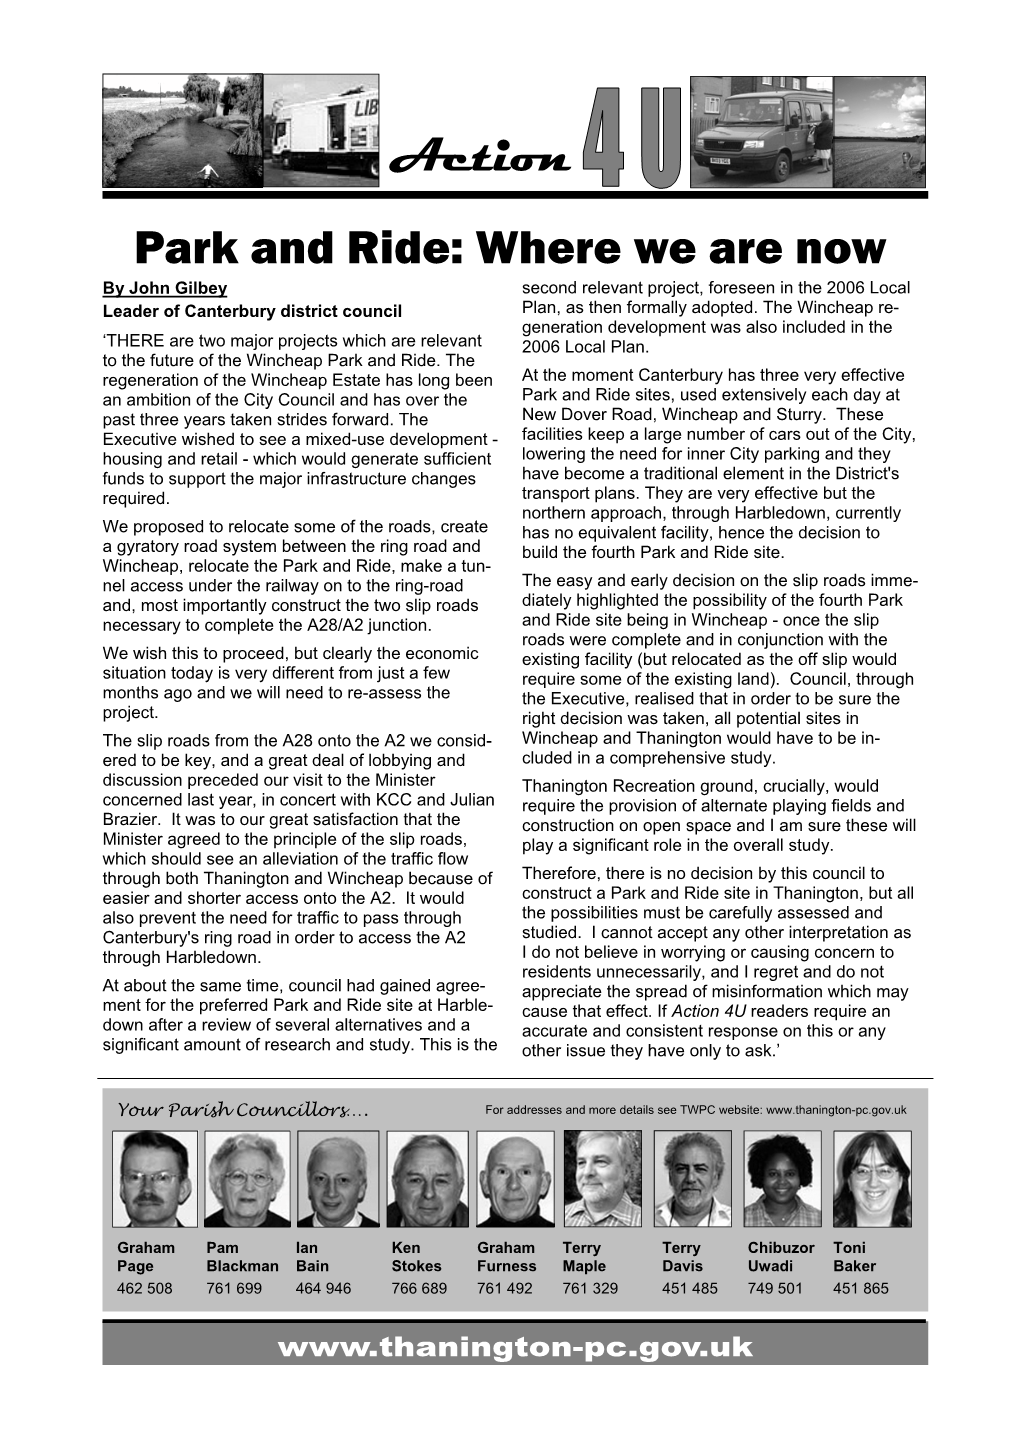 Action Park and Ride: Where We Are